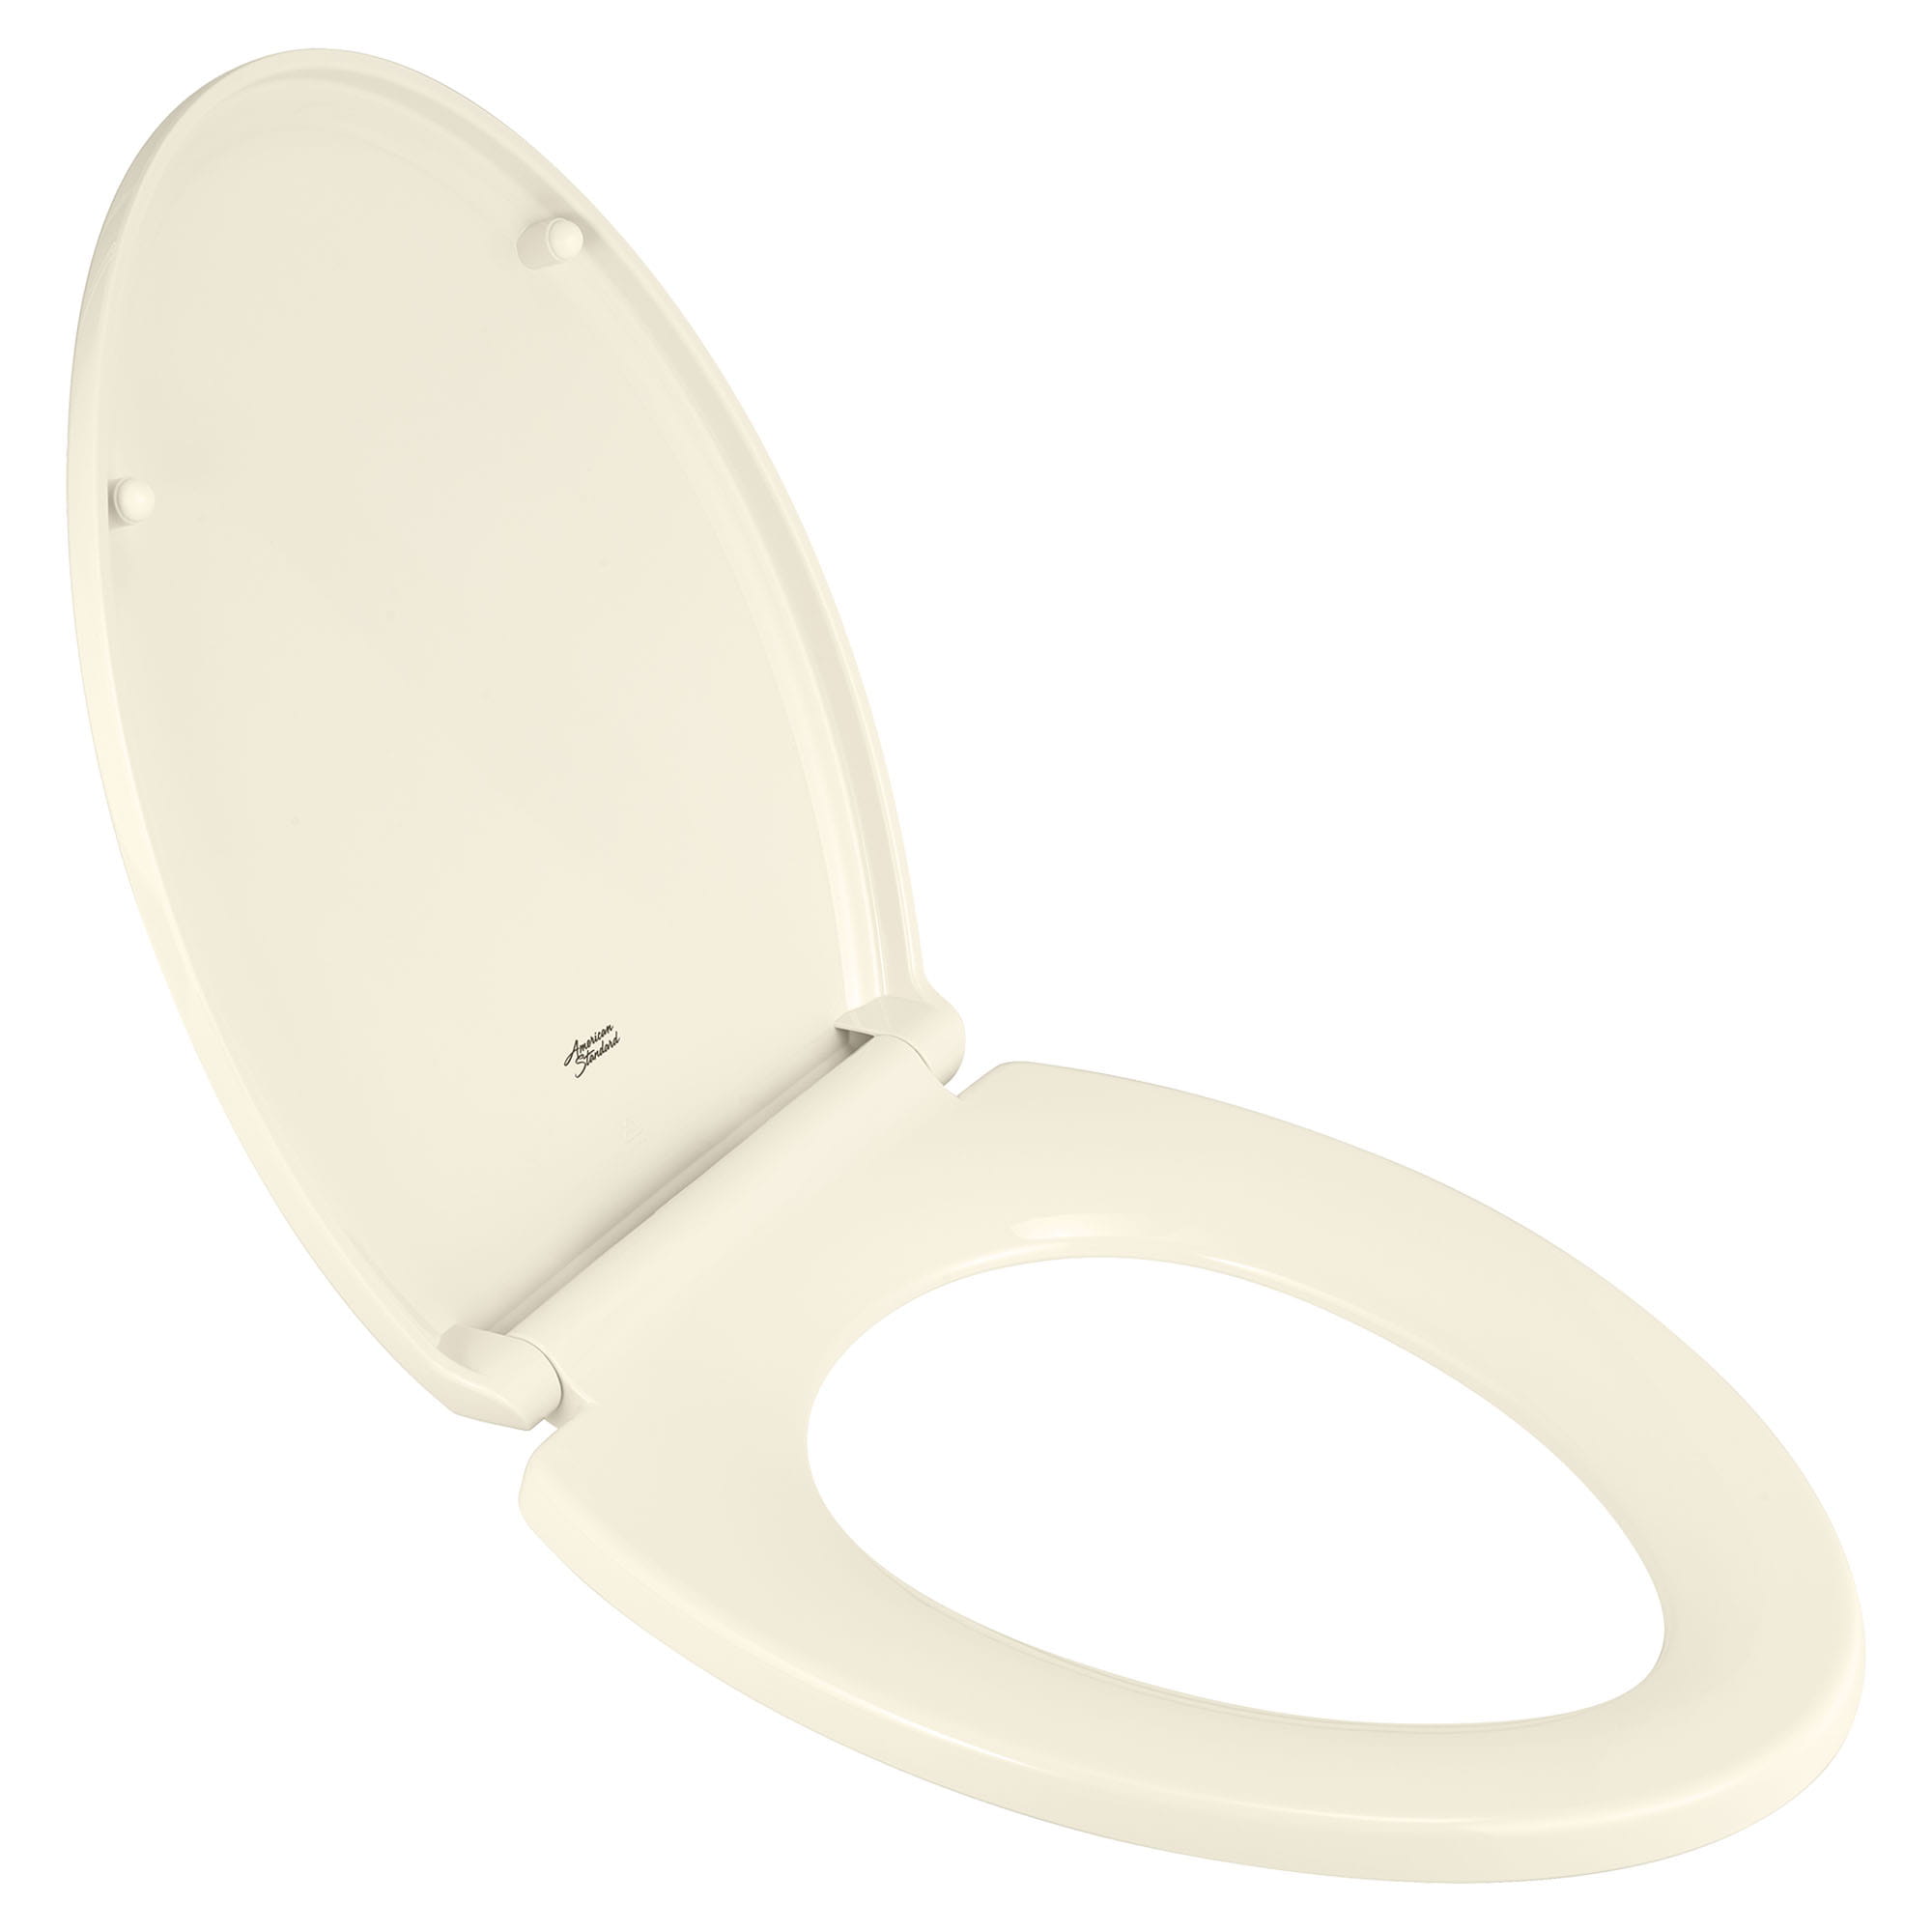 Traditional Slow-Close & Easy Lift-Off Elongated Toilet Seat